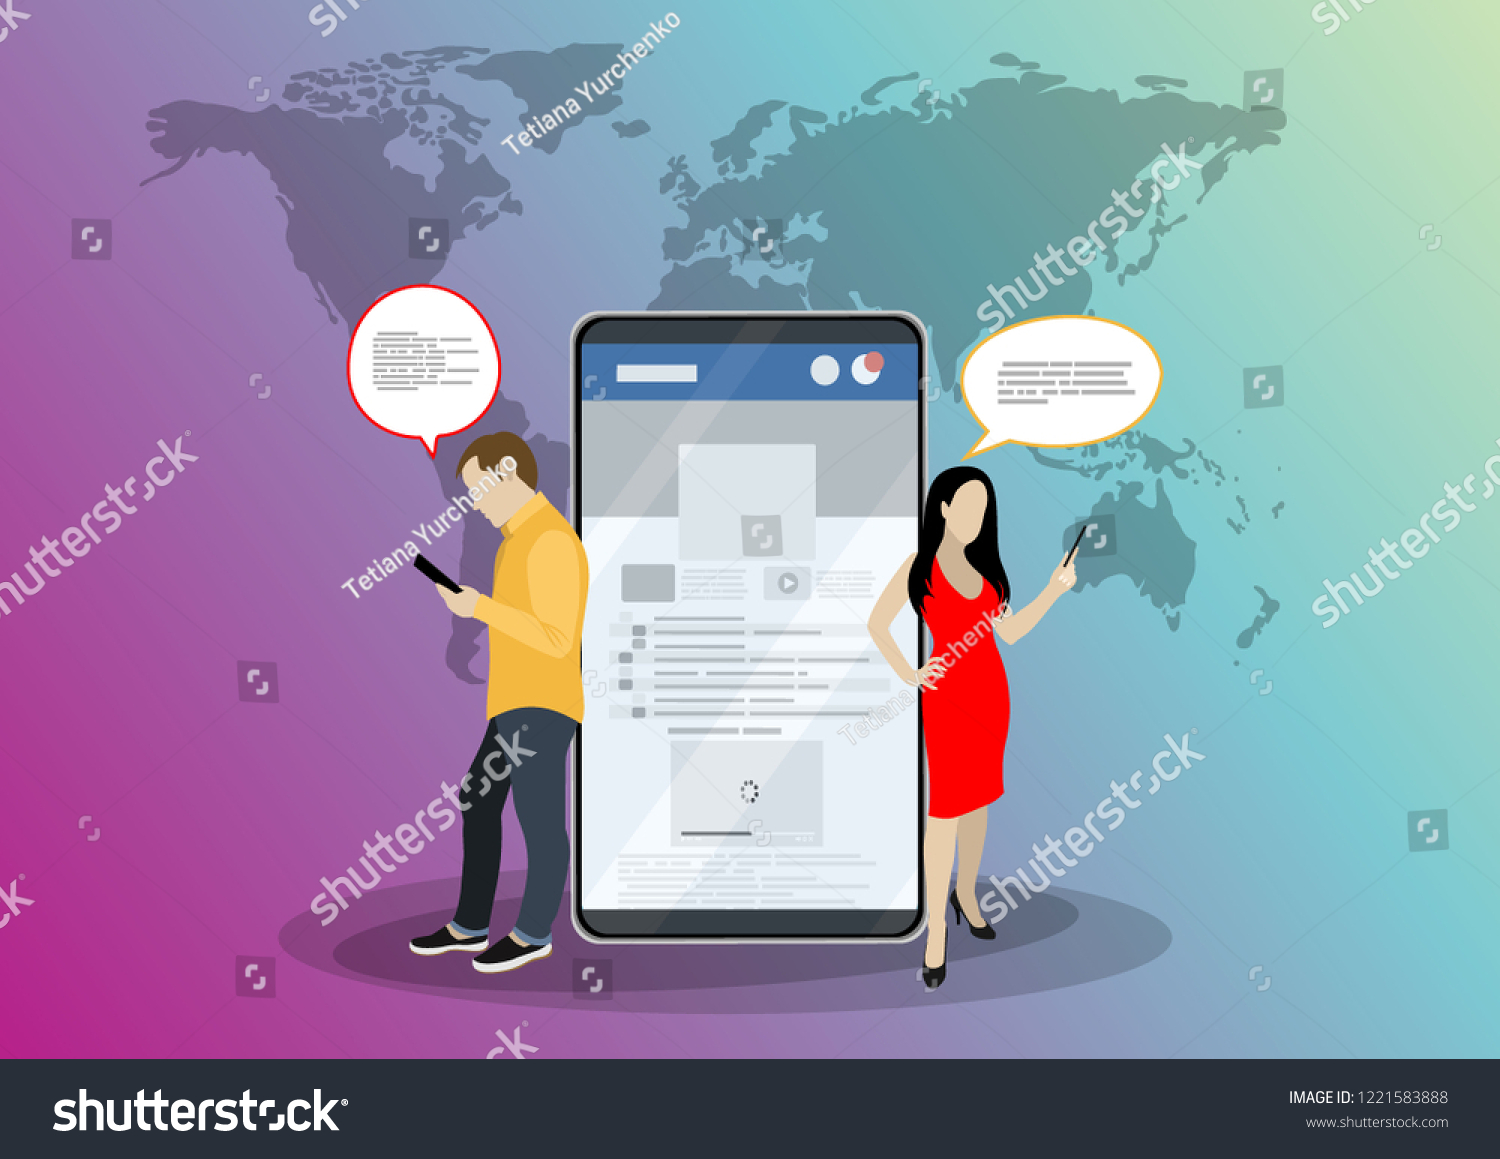 Social network web site surfing concept illustration of young people using mobile gadgets such as smartphone, tablet pc part of online community. Flat style. Vector illustration. #1221583888